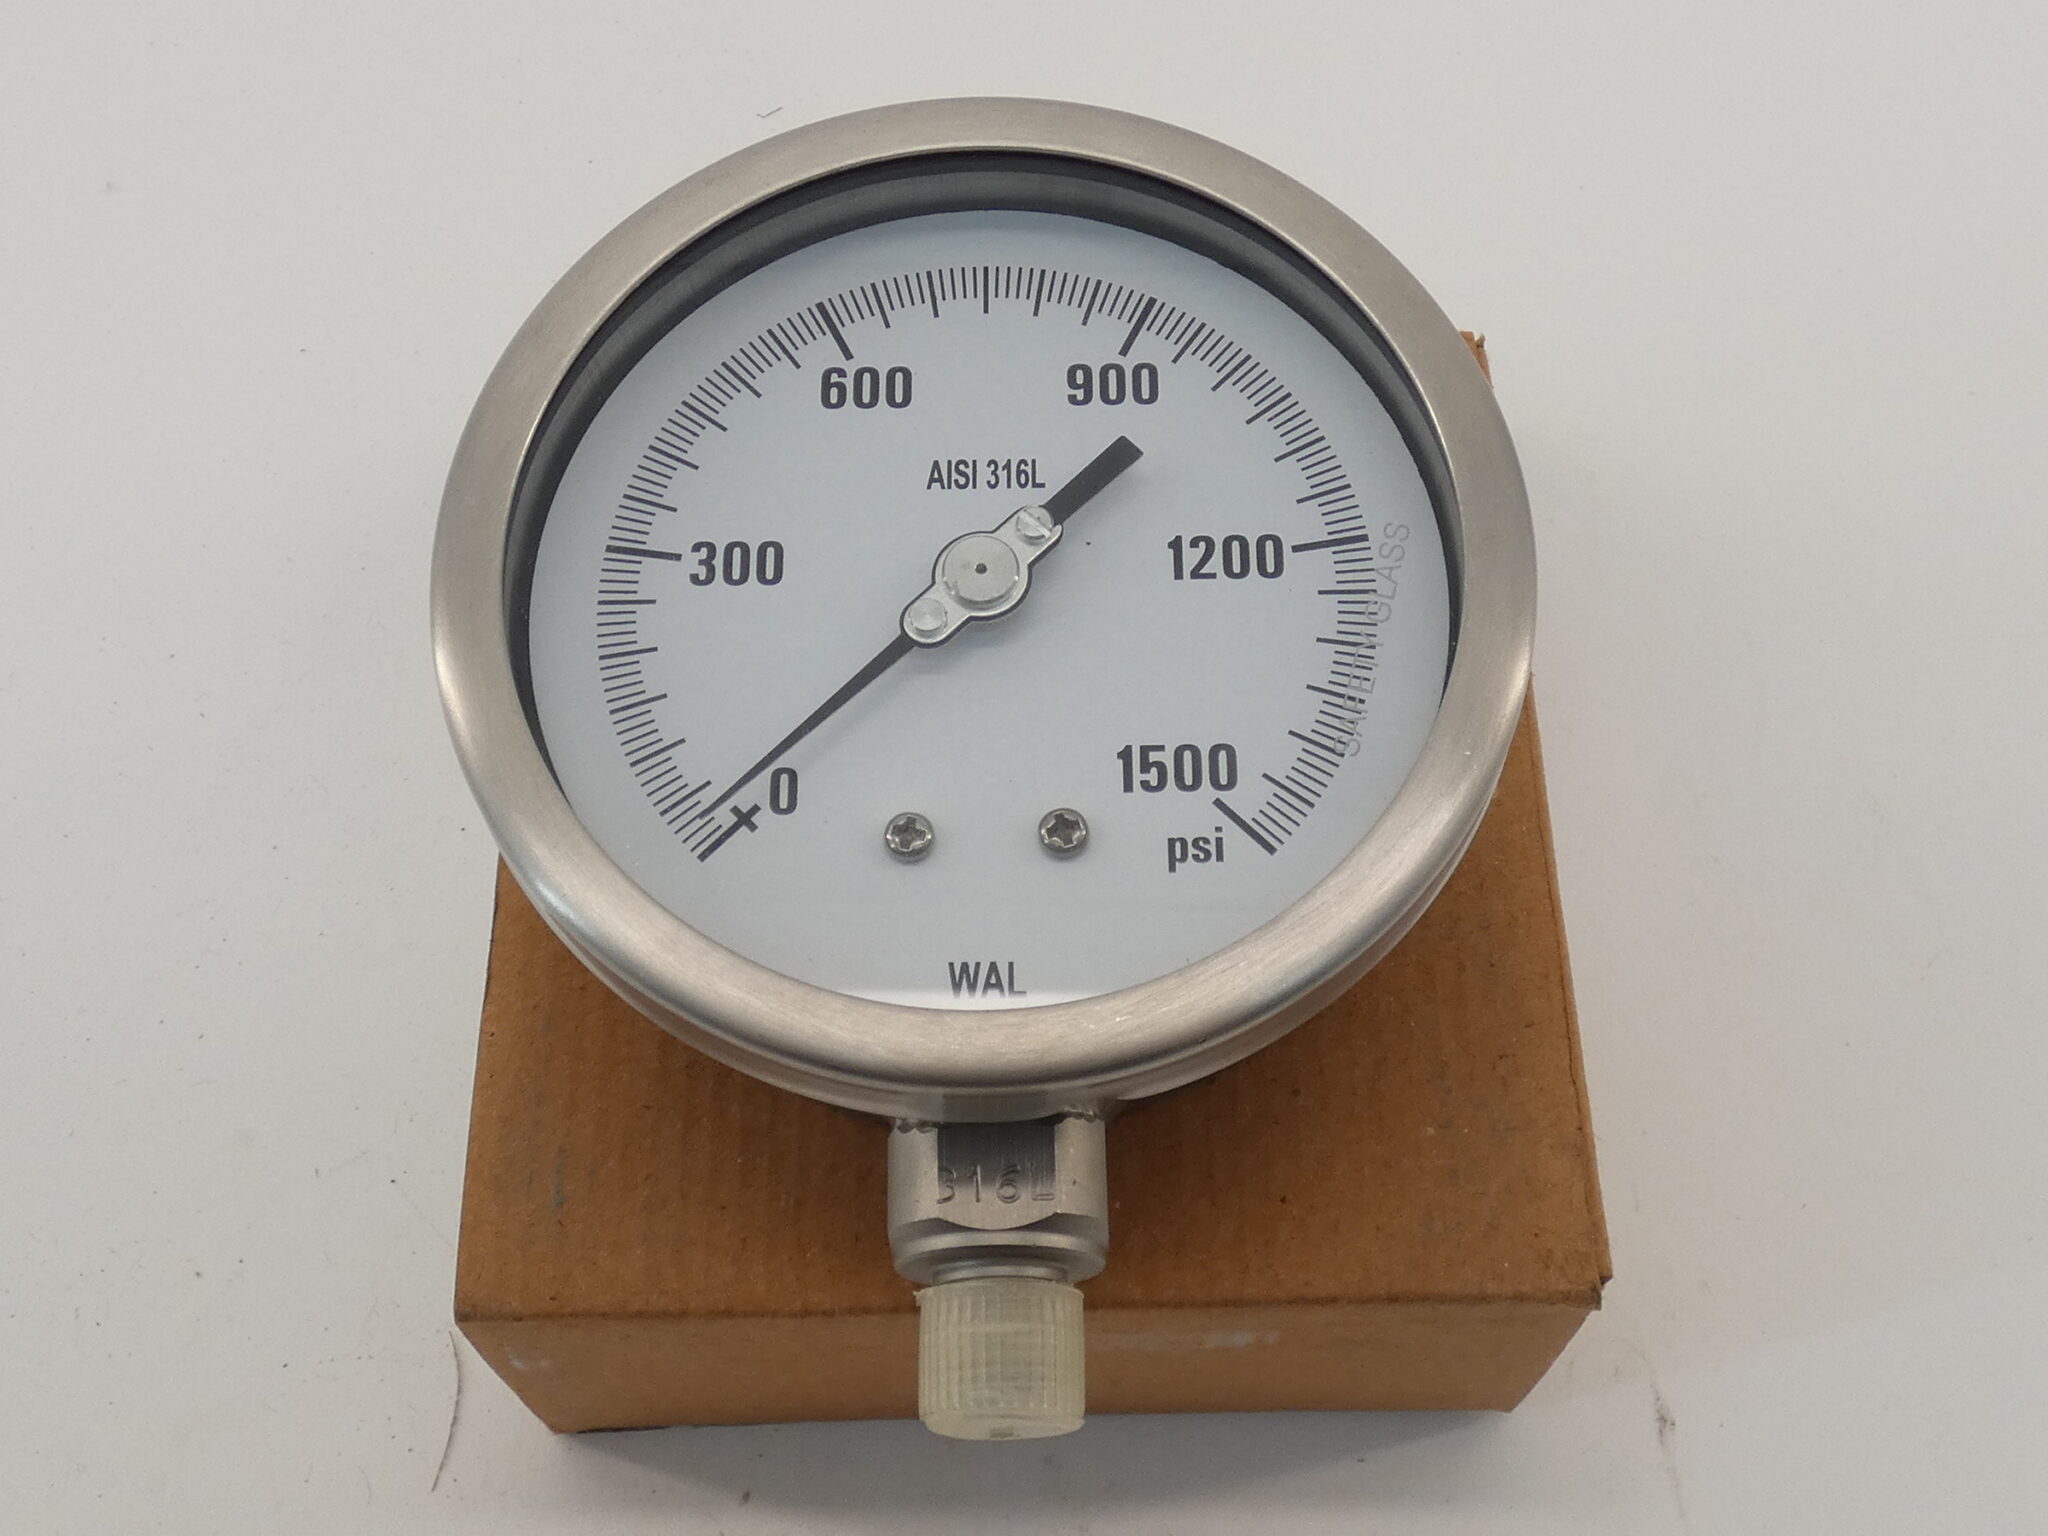 WAL Pressure Gauge 4" Face Dial 0-1500 PSI 1/4" NPT Bottom Connection - NEW S...